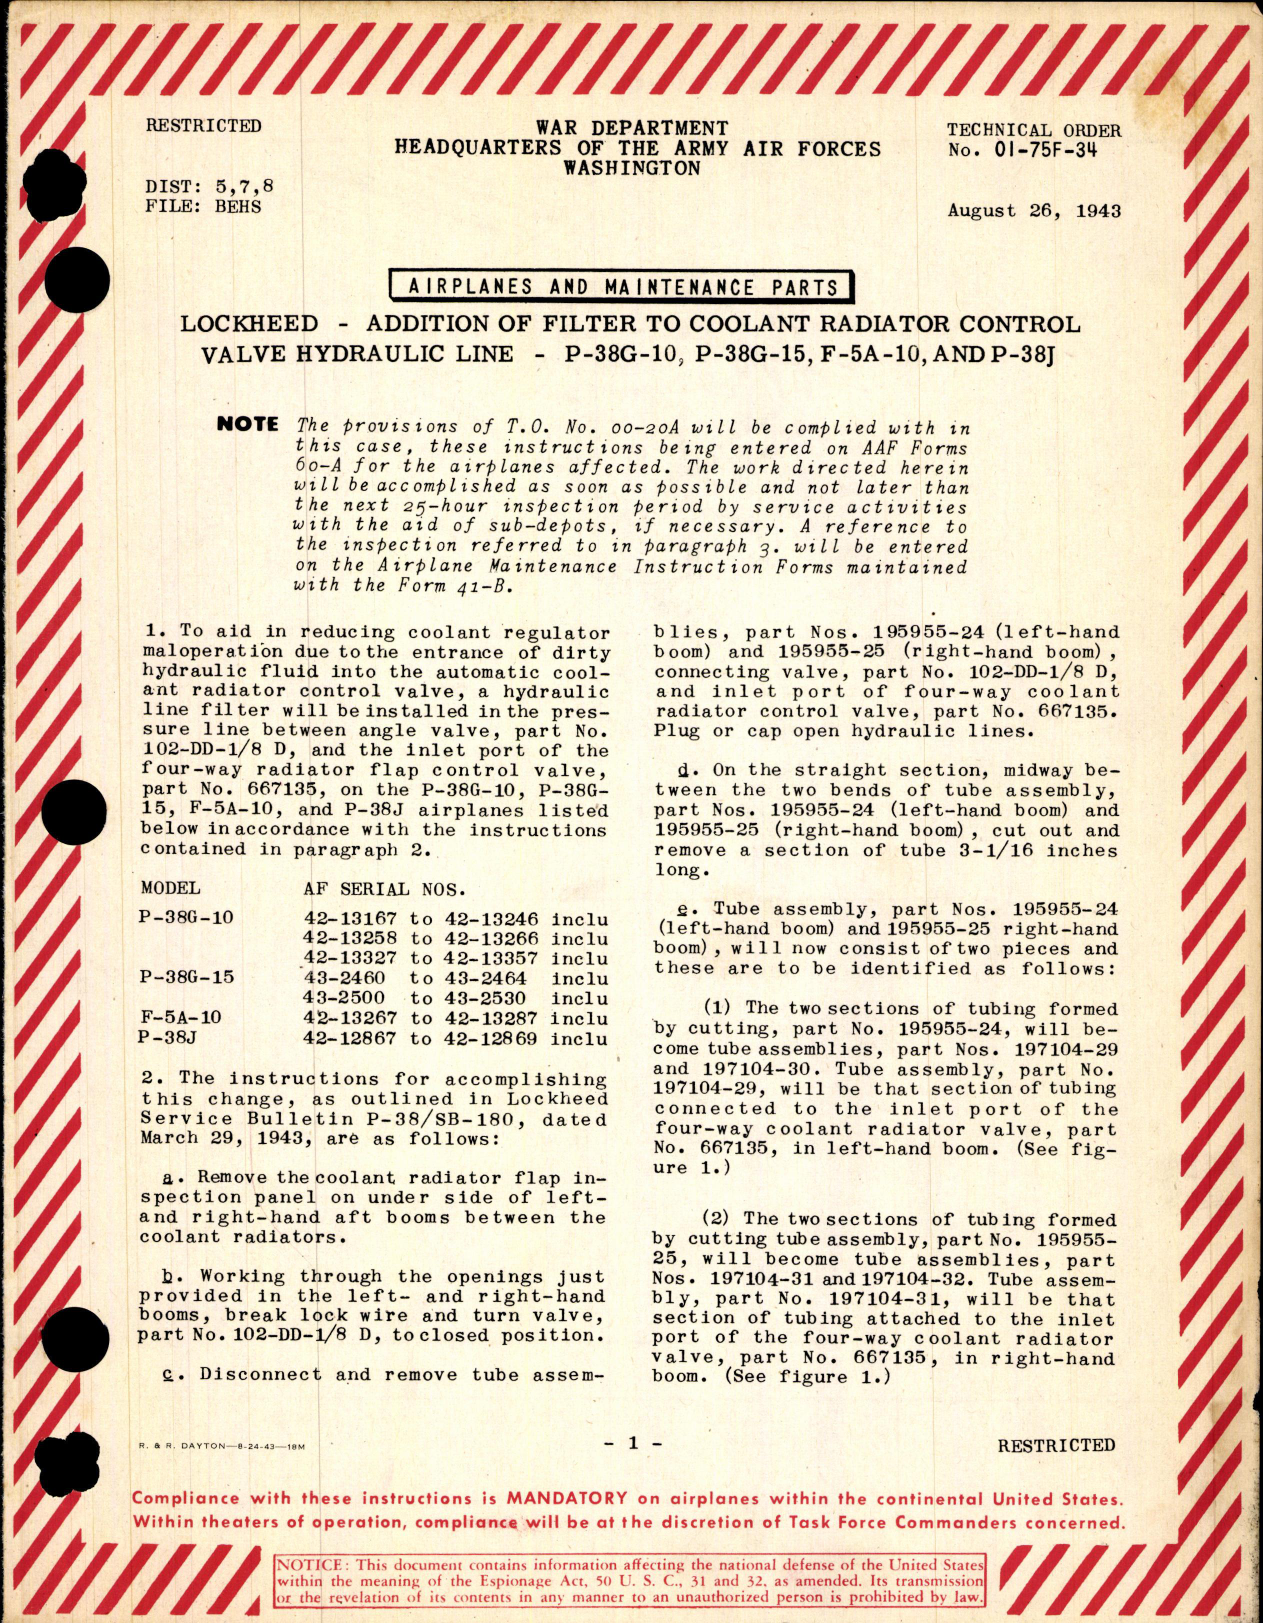 Sample page 1 from AirCorps Library document: Addition of Filter to Coolant Radiator Control Valve Hydraulic Line for P-38G-10, -15, P-38J, and F-5A-10